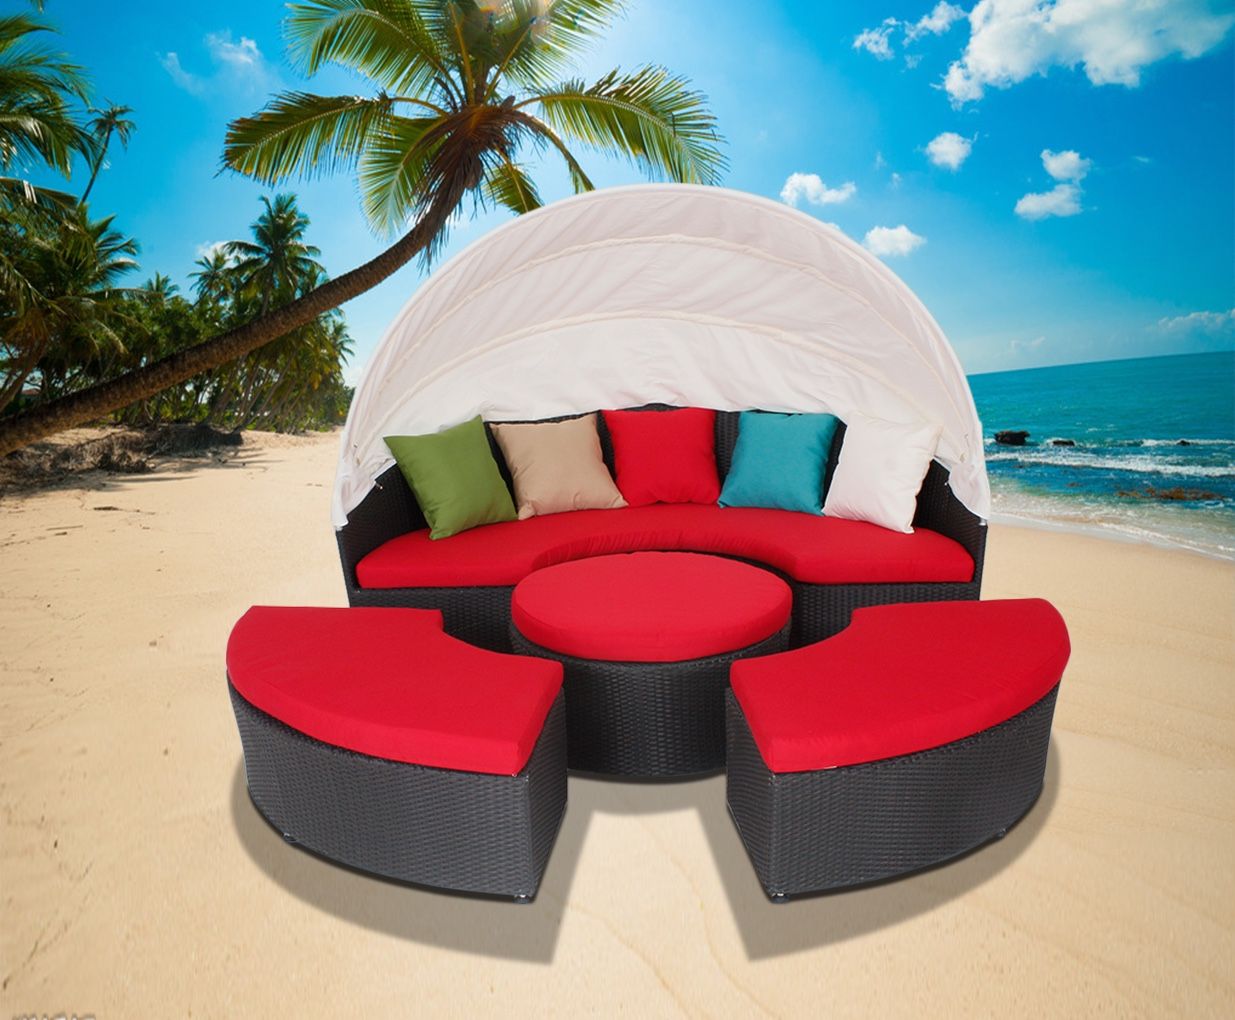 Patio furniture round day bed Jul.4th sale 599$ now - Jul.3rd no assemble needed